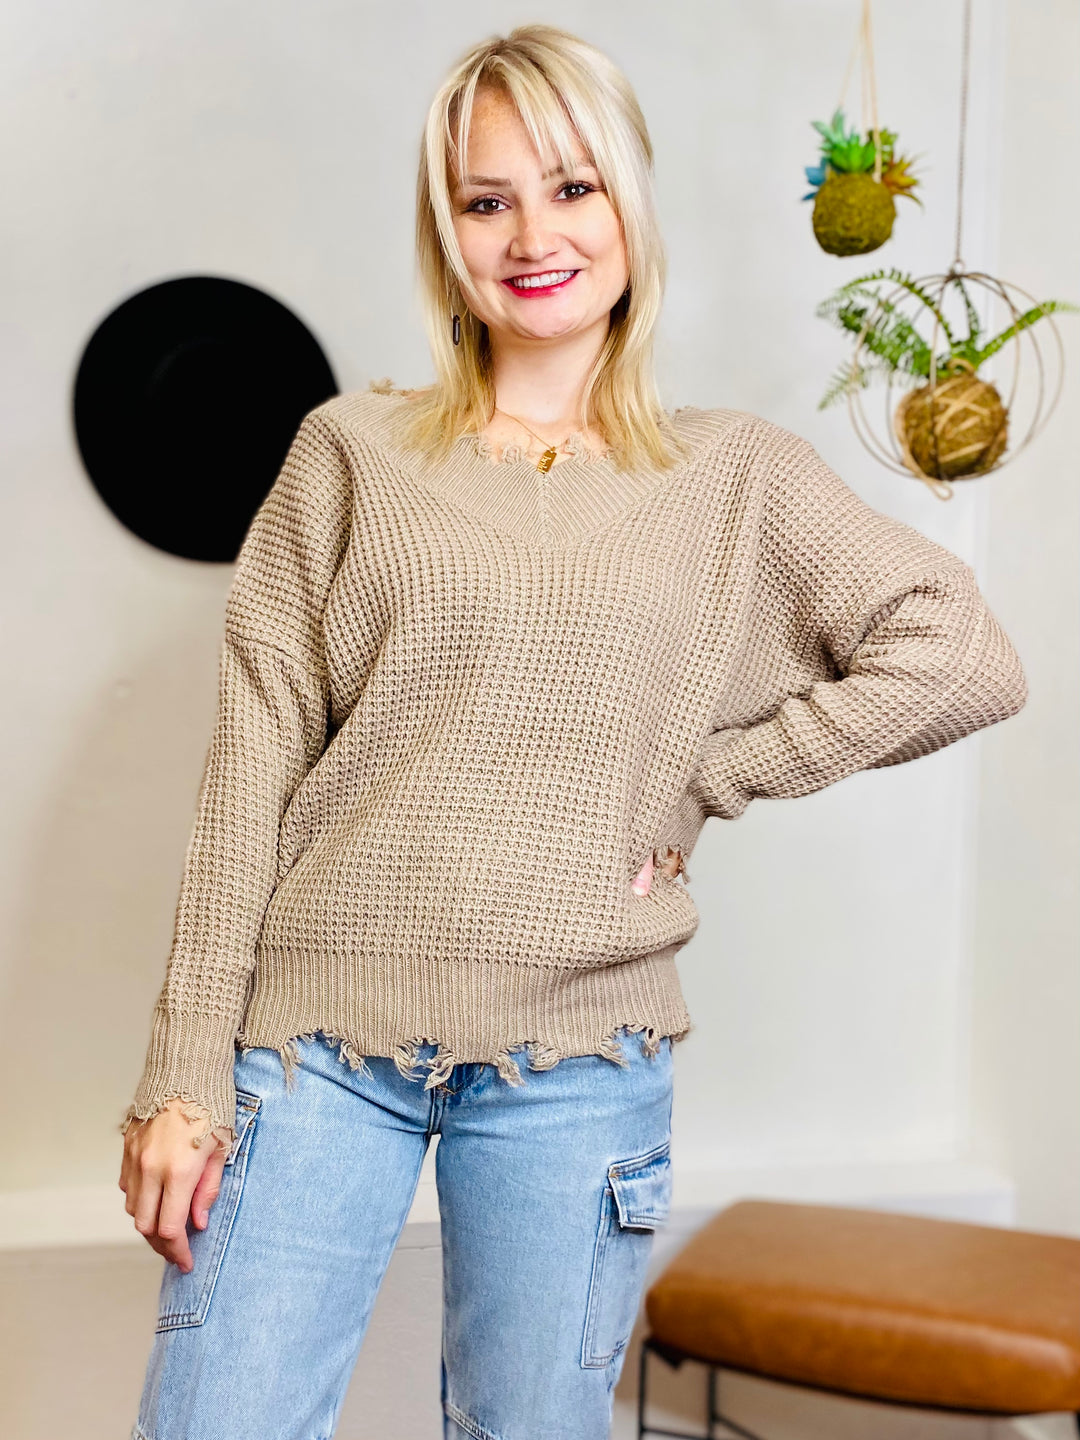 Bex Distressed Knit Sweater - Mocha-Tops-Anatomy Clothing Boutique in Brenham, Texas